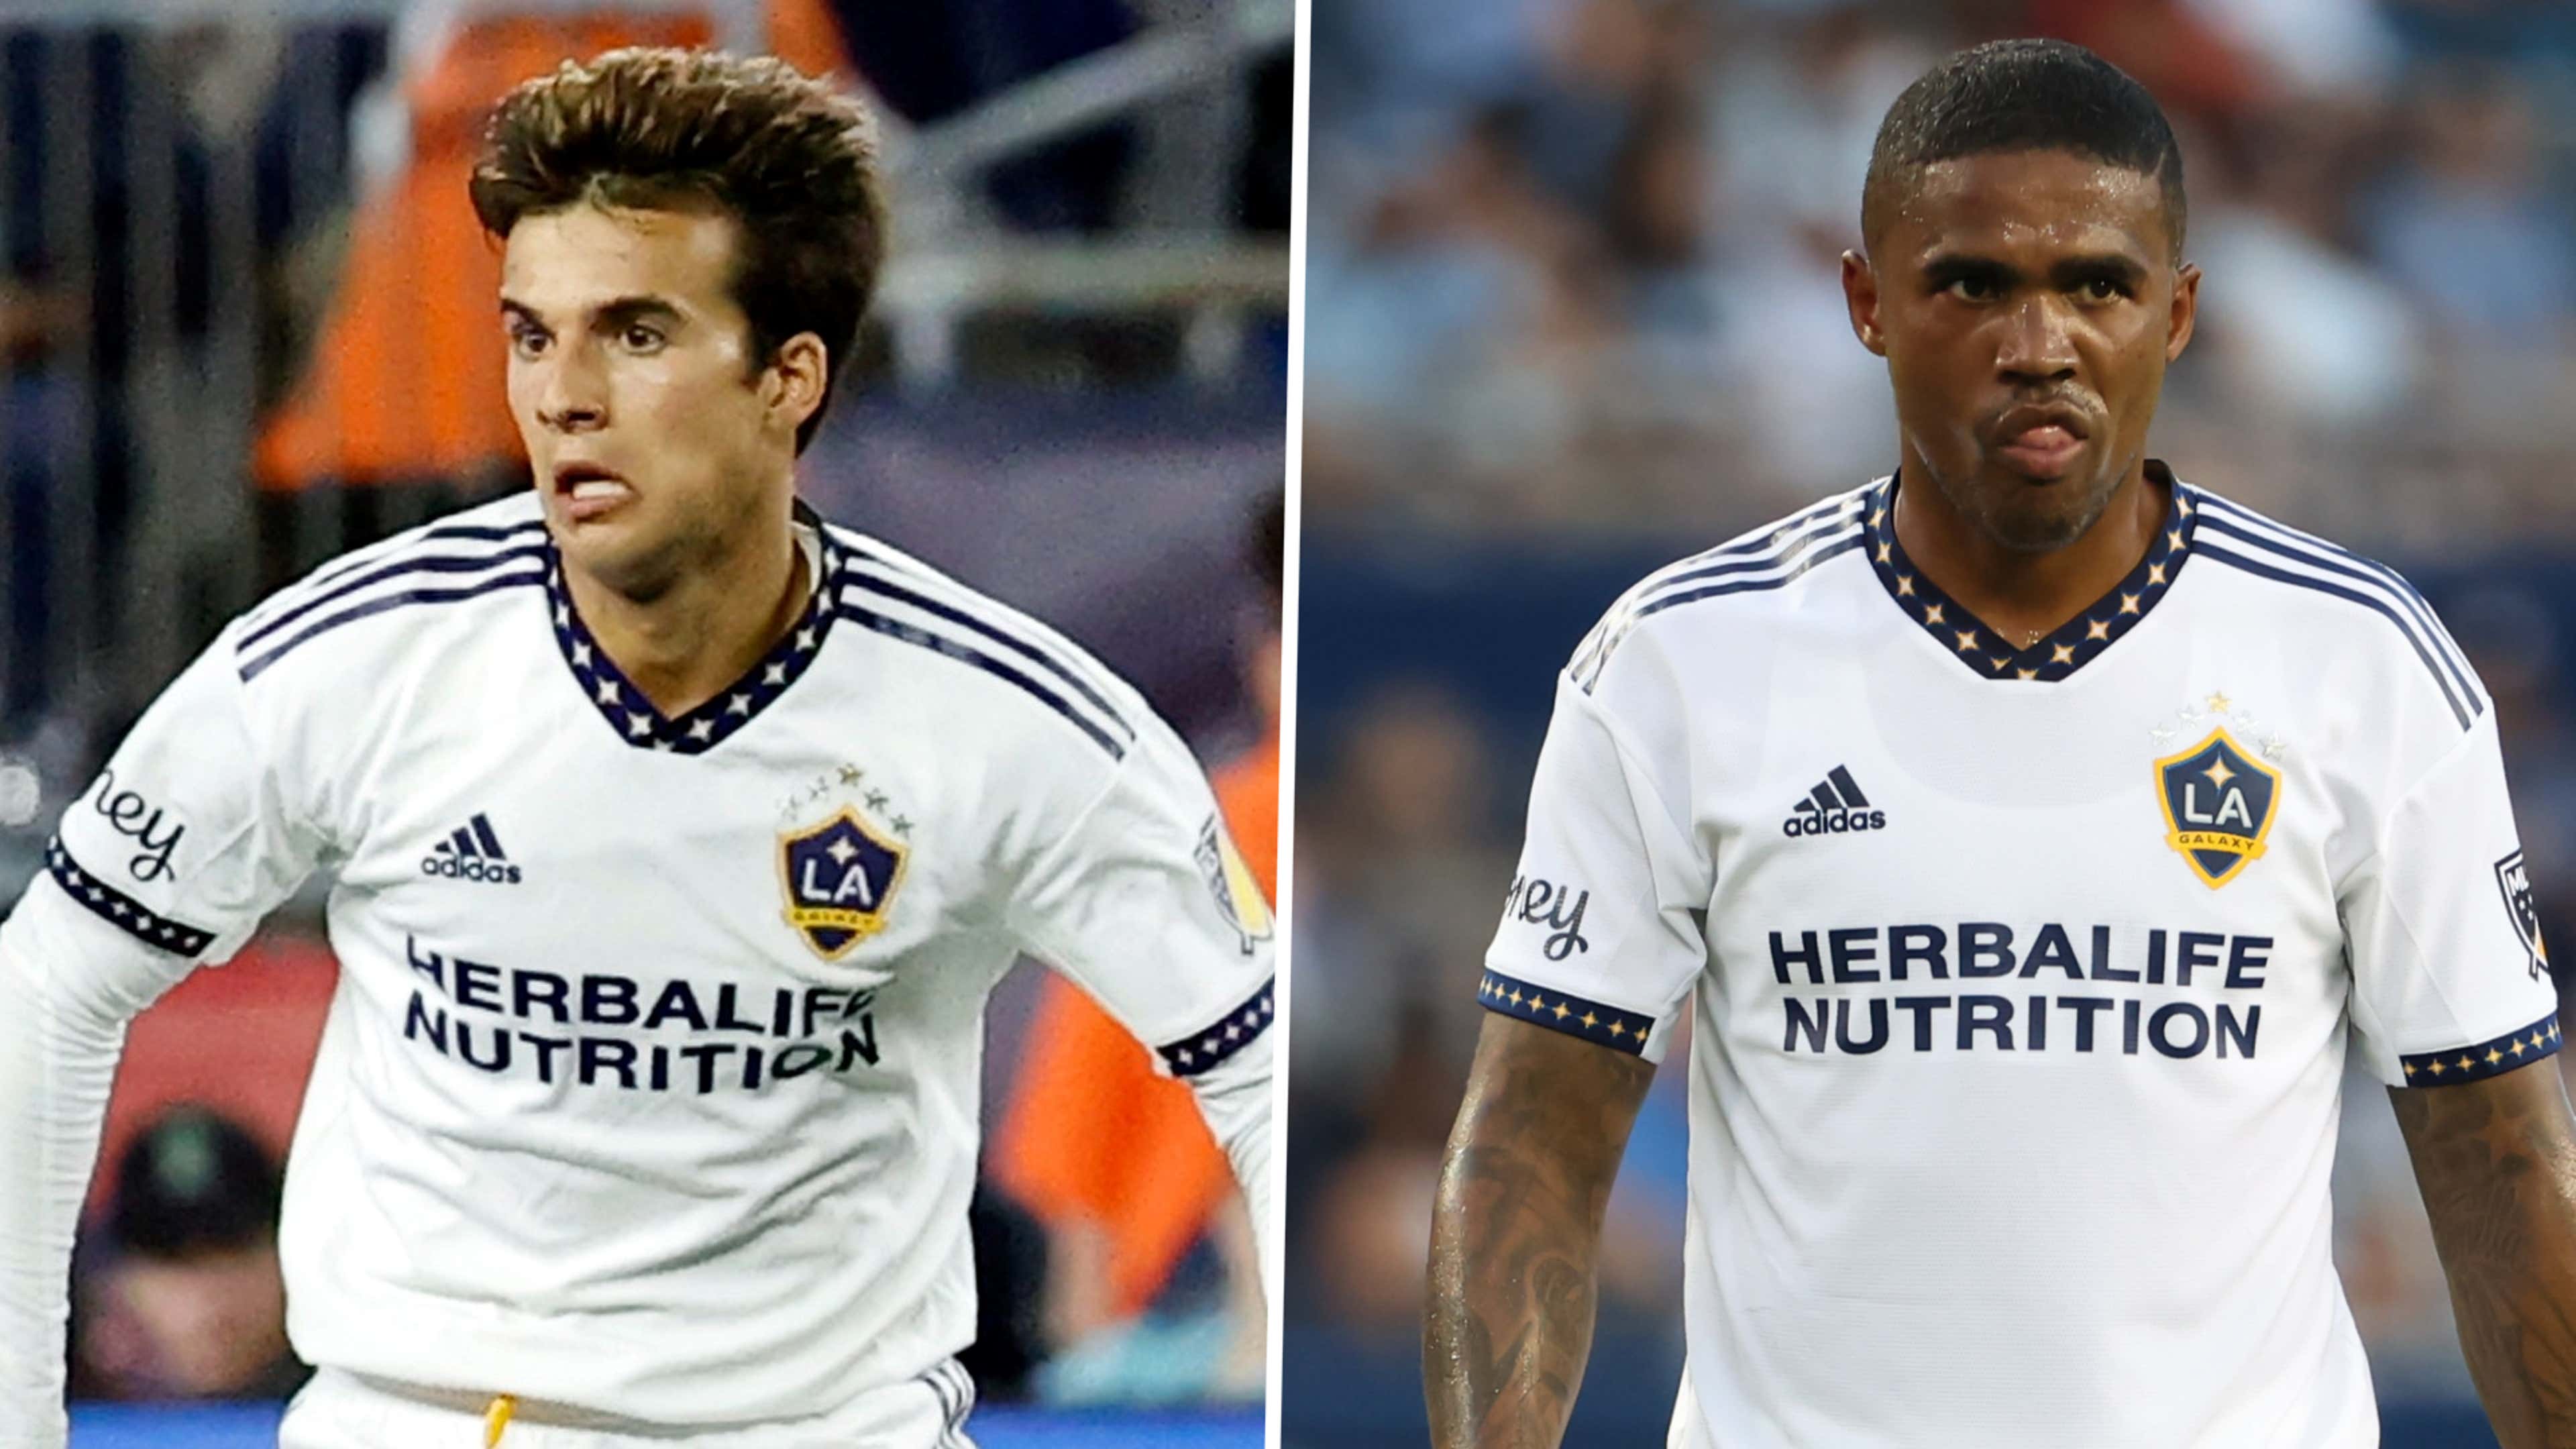 A tale of two signings: Puig shines while Costa falters as Galaxy